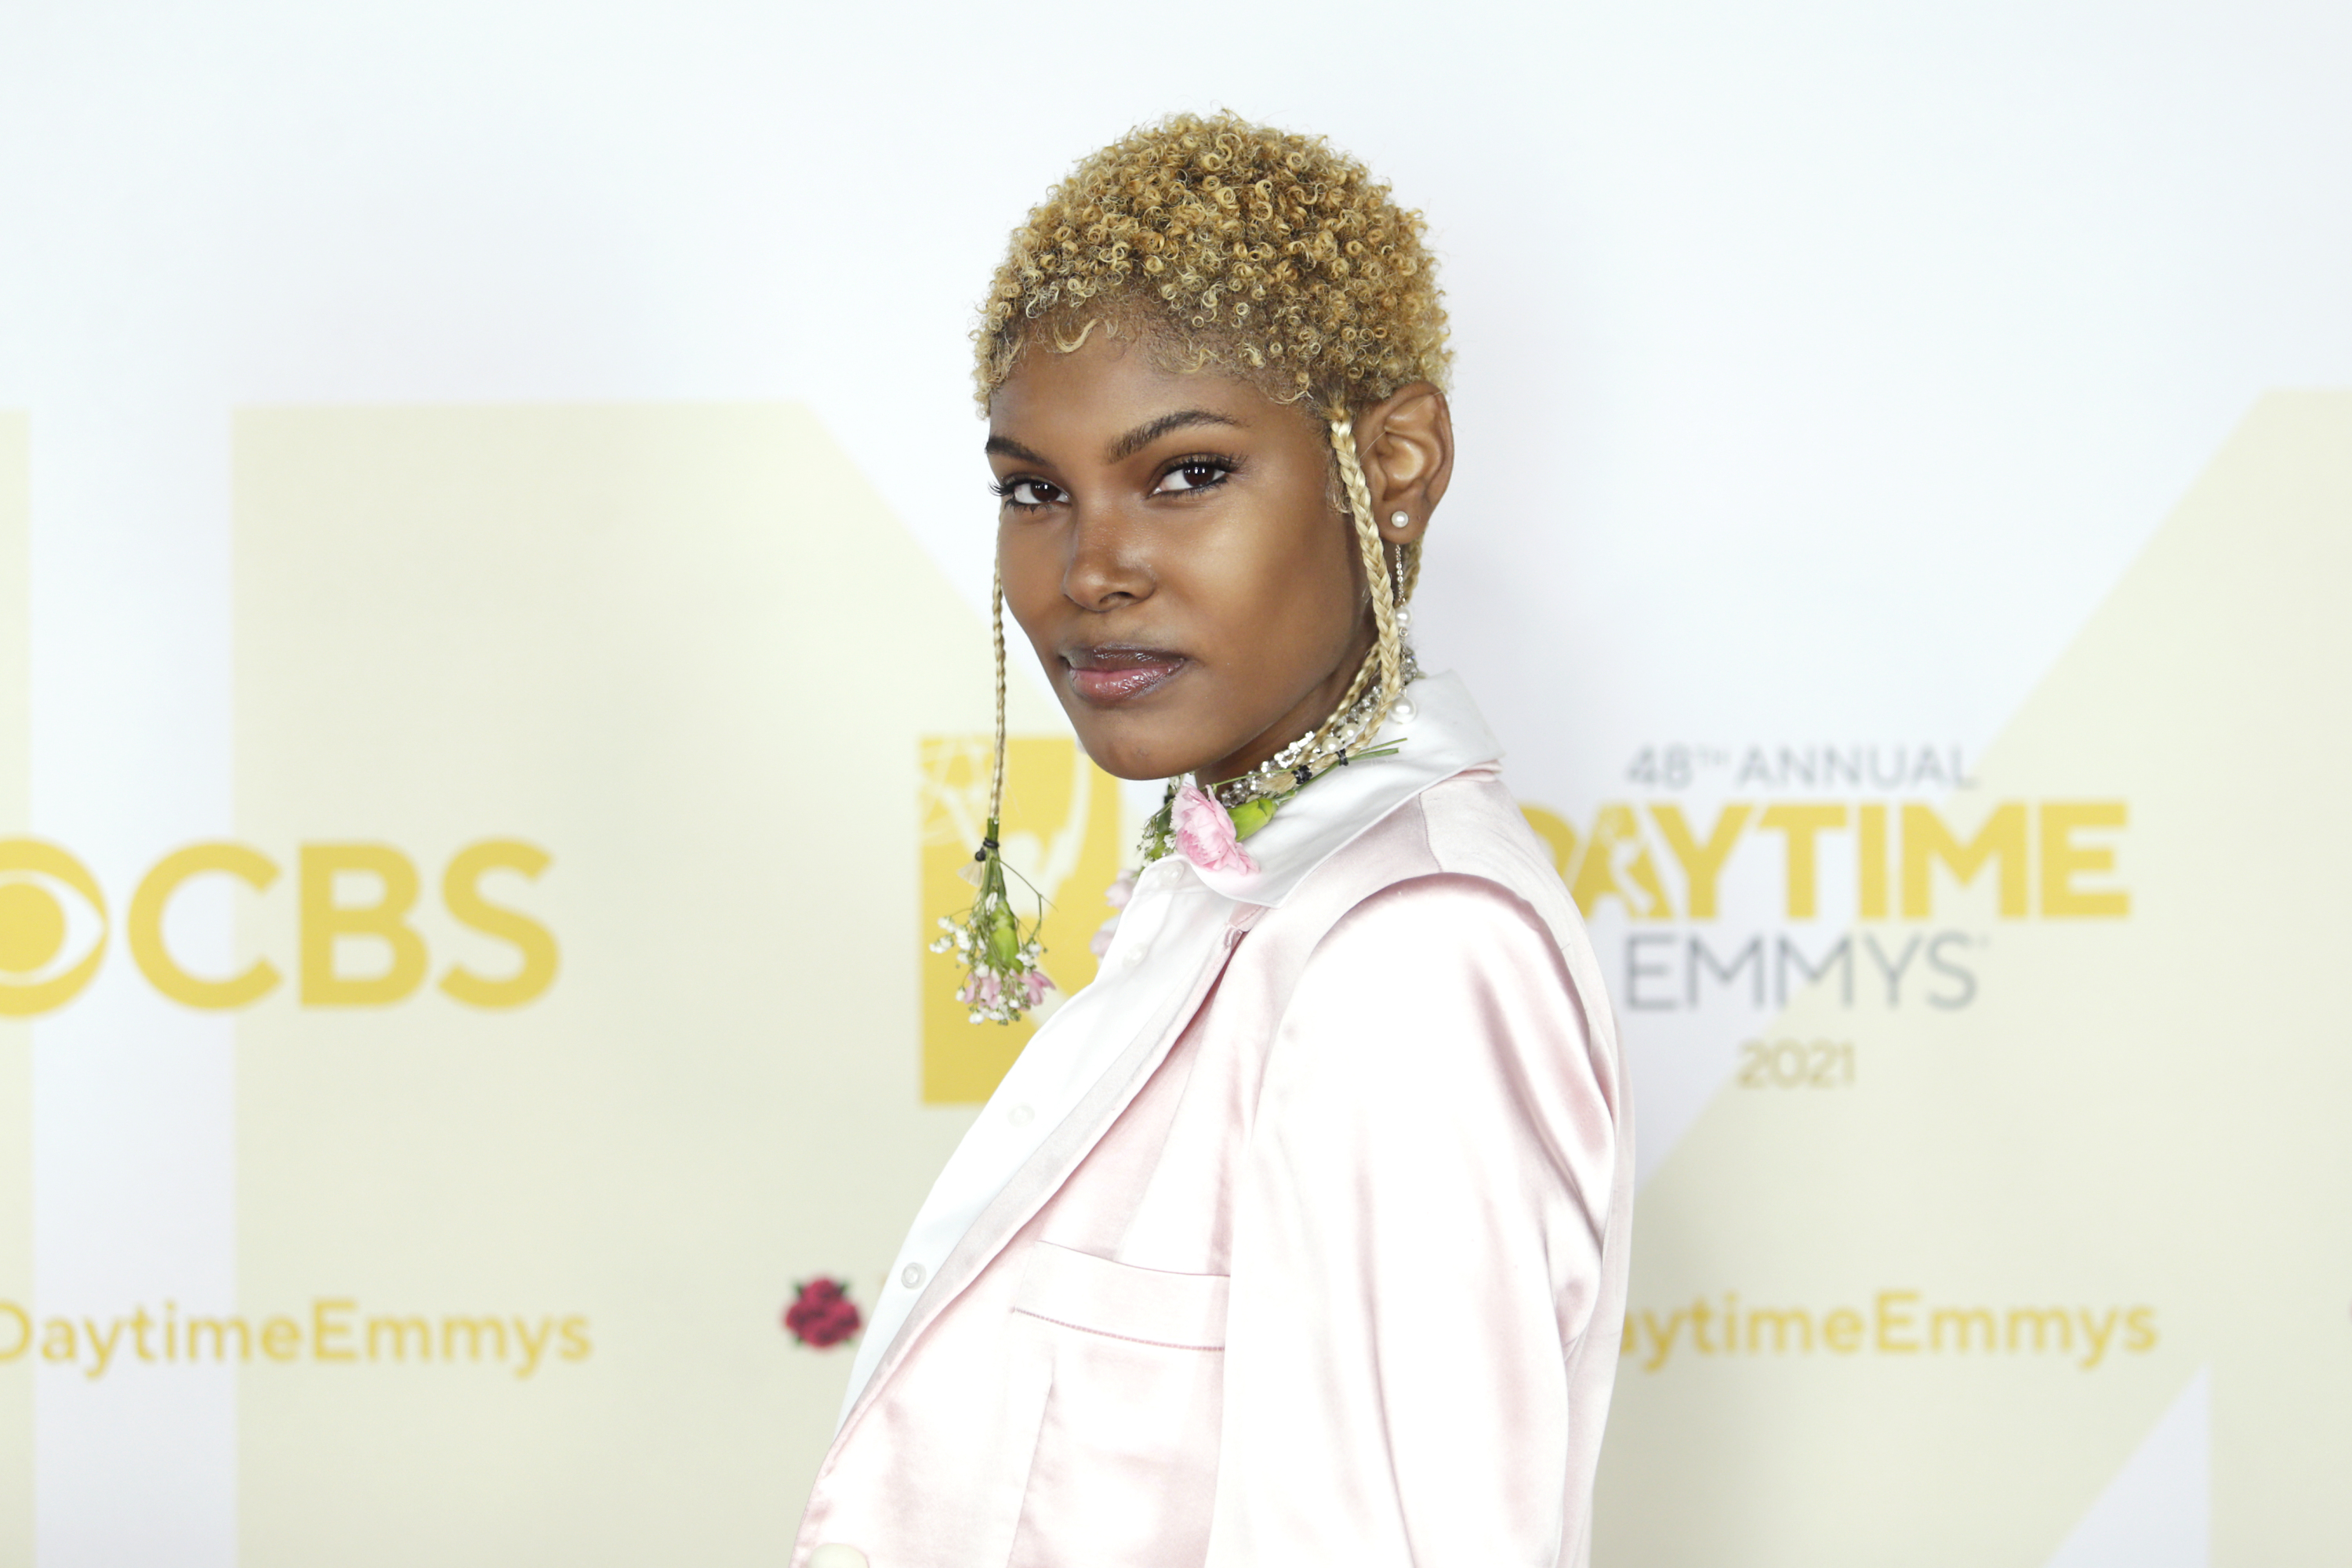 'The Bold and the Beautiful' actor Diamond White wearing a pink blazer, and posing on the red carpet.